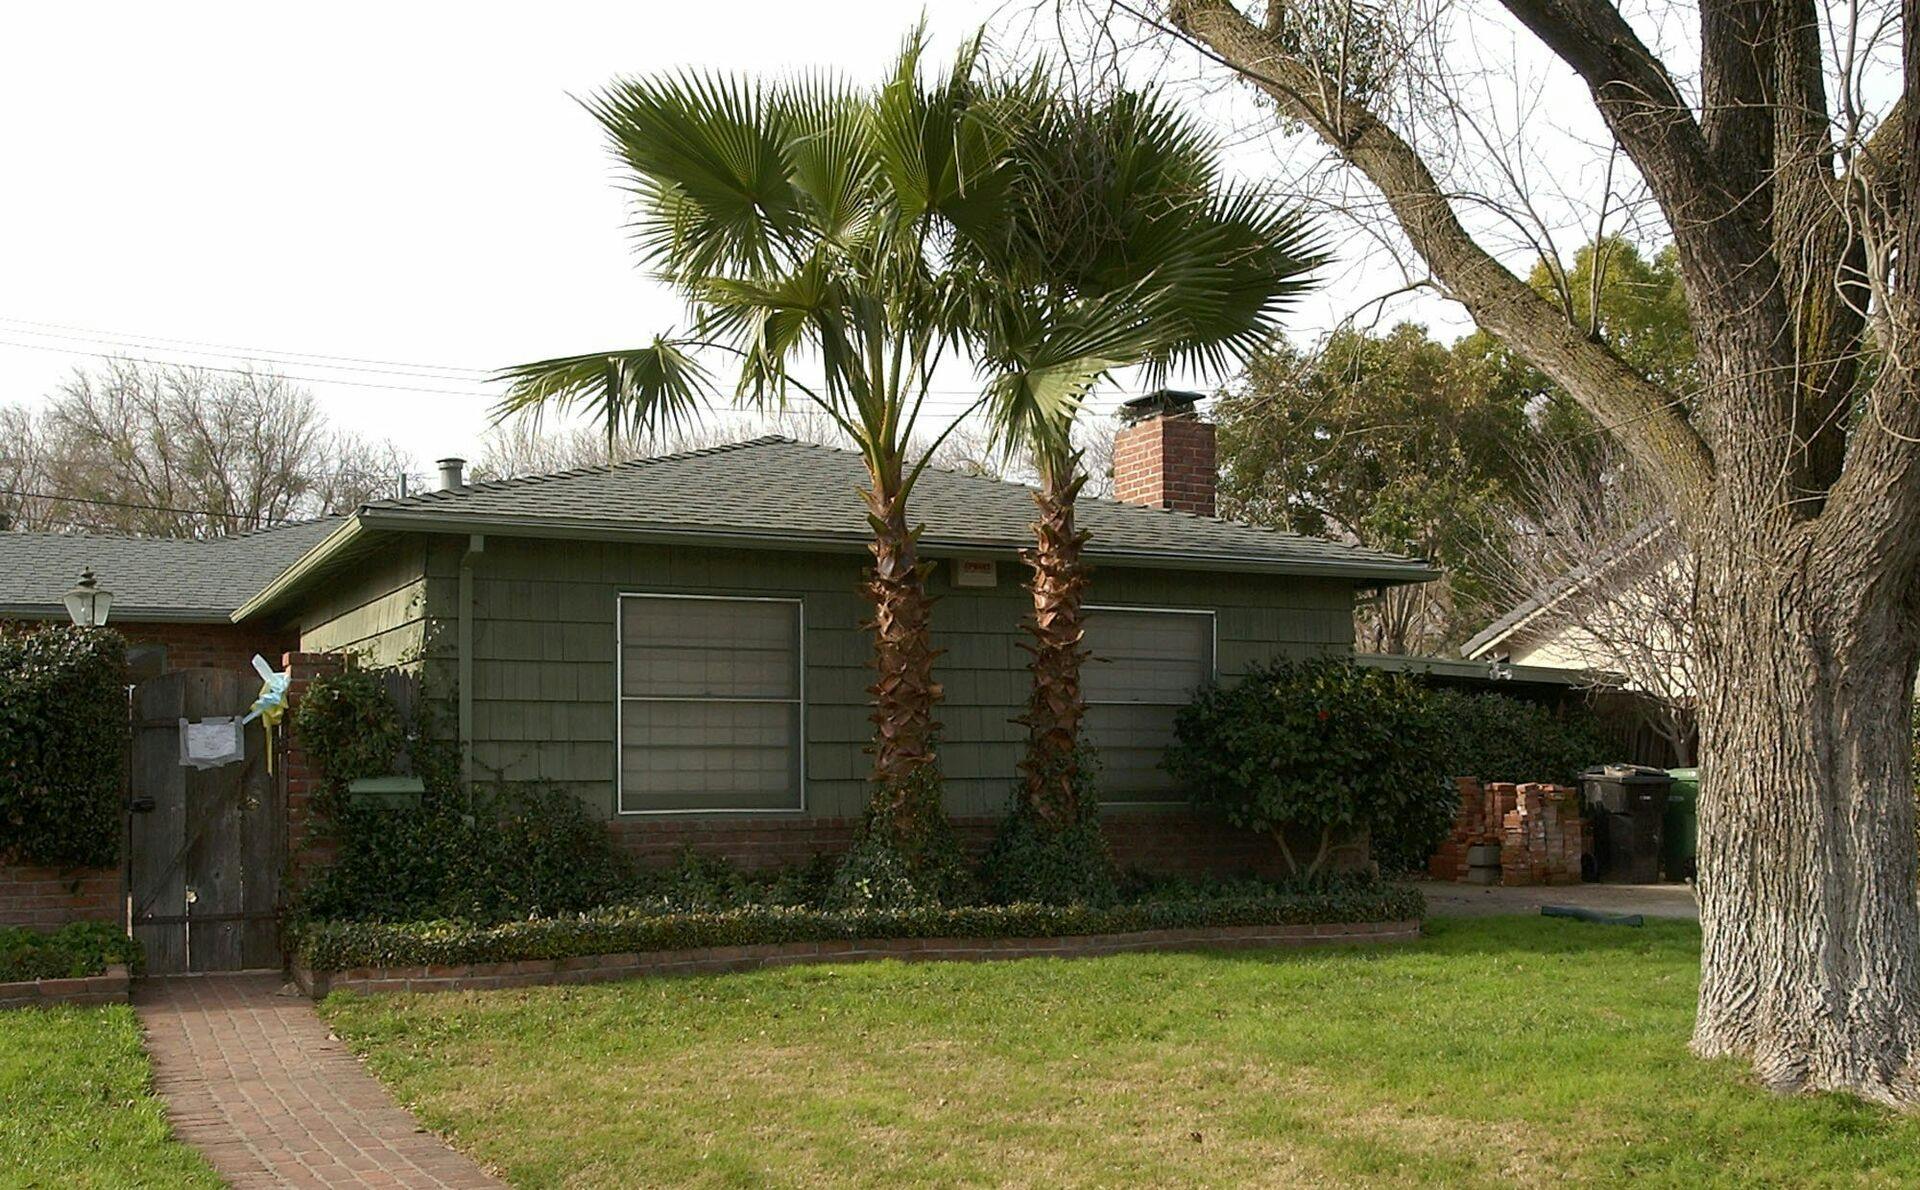 ** FILE ** The Modesto, Calif., home of Laci and Scott Peterson is seen Thursday, Jan. 2, 2003. The house on a quiet, tree-lined Modesto street where police believe Scott Peterson killed his pregnant wife, Laci, has sold again for nearly $350, 000, a real estate agent said. (AP Photo/Ben Margot)